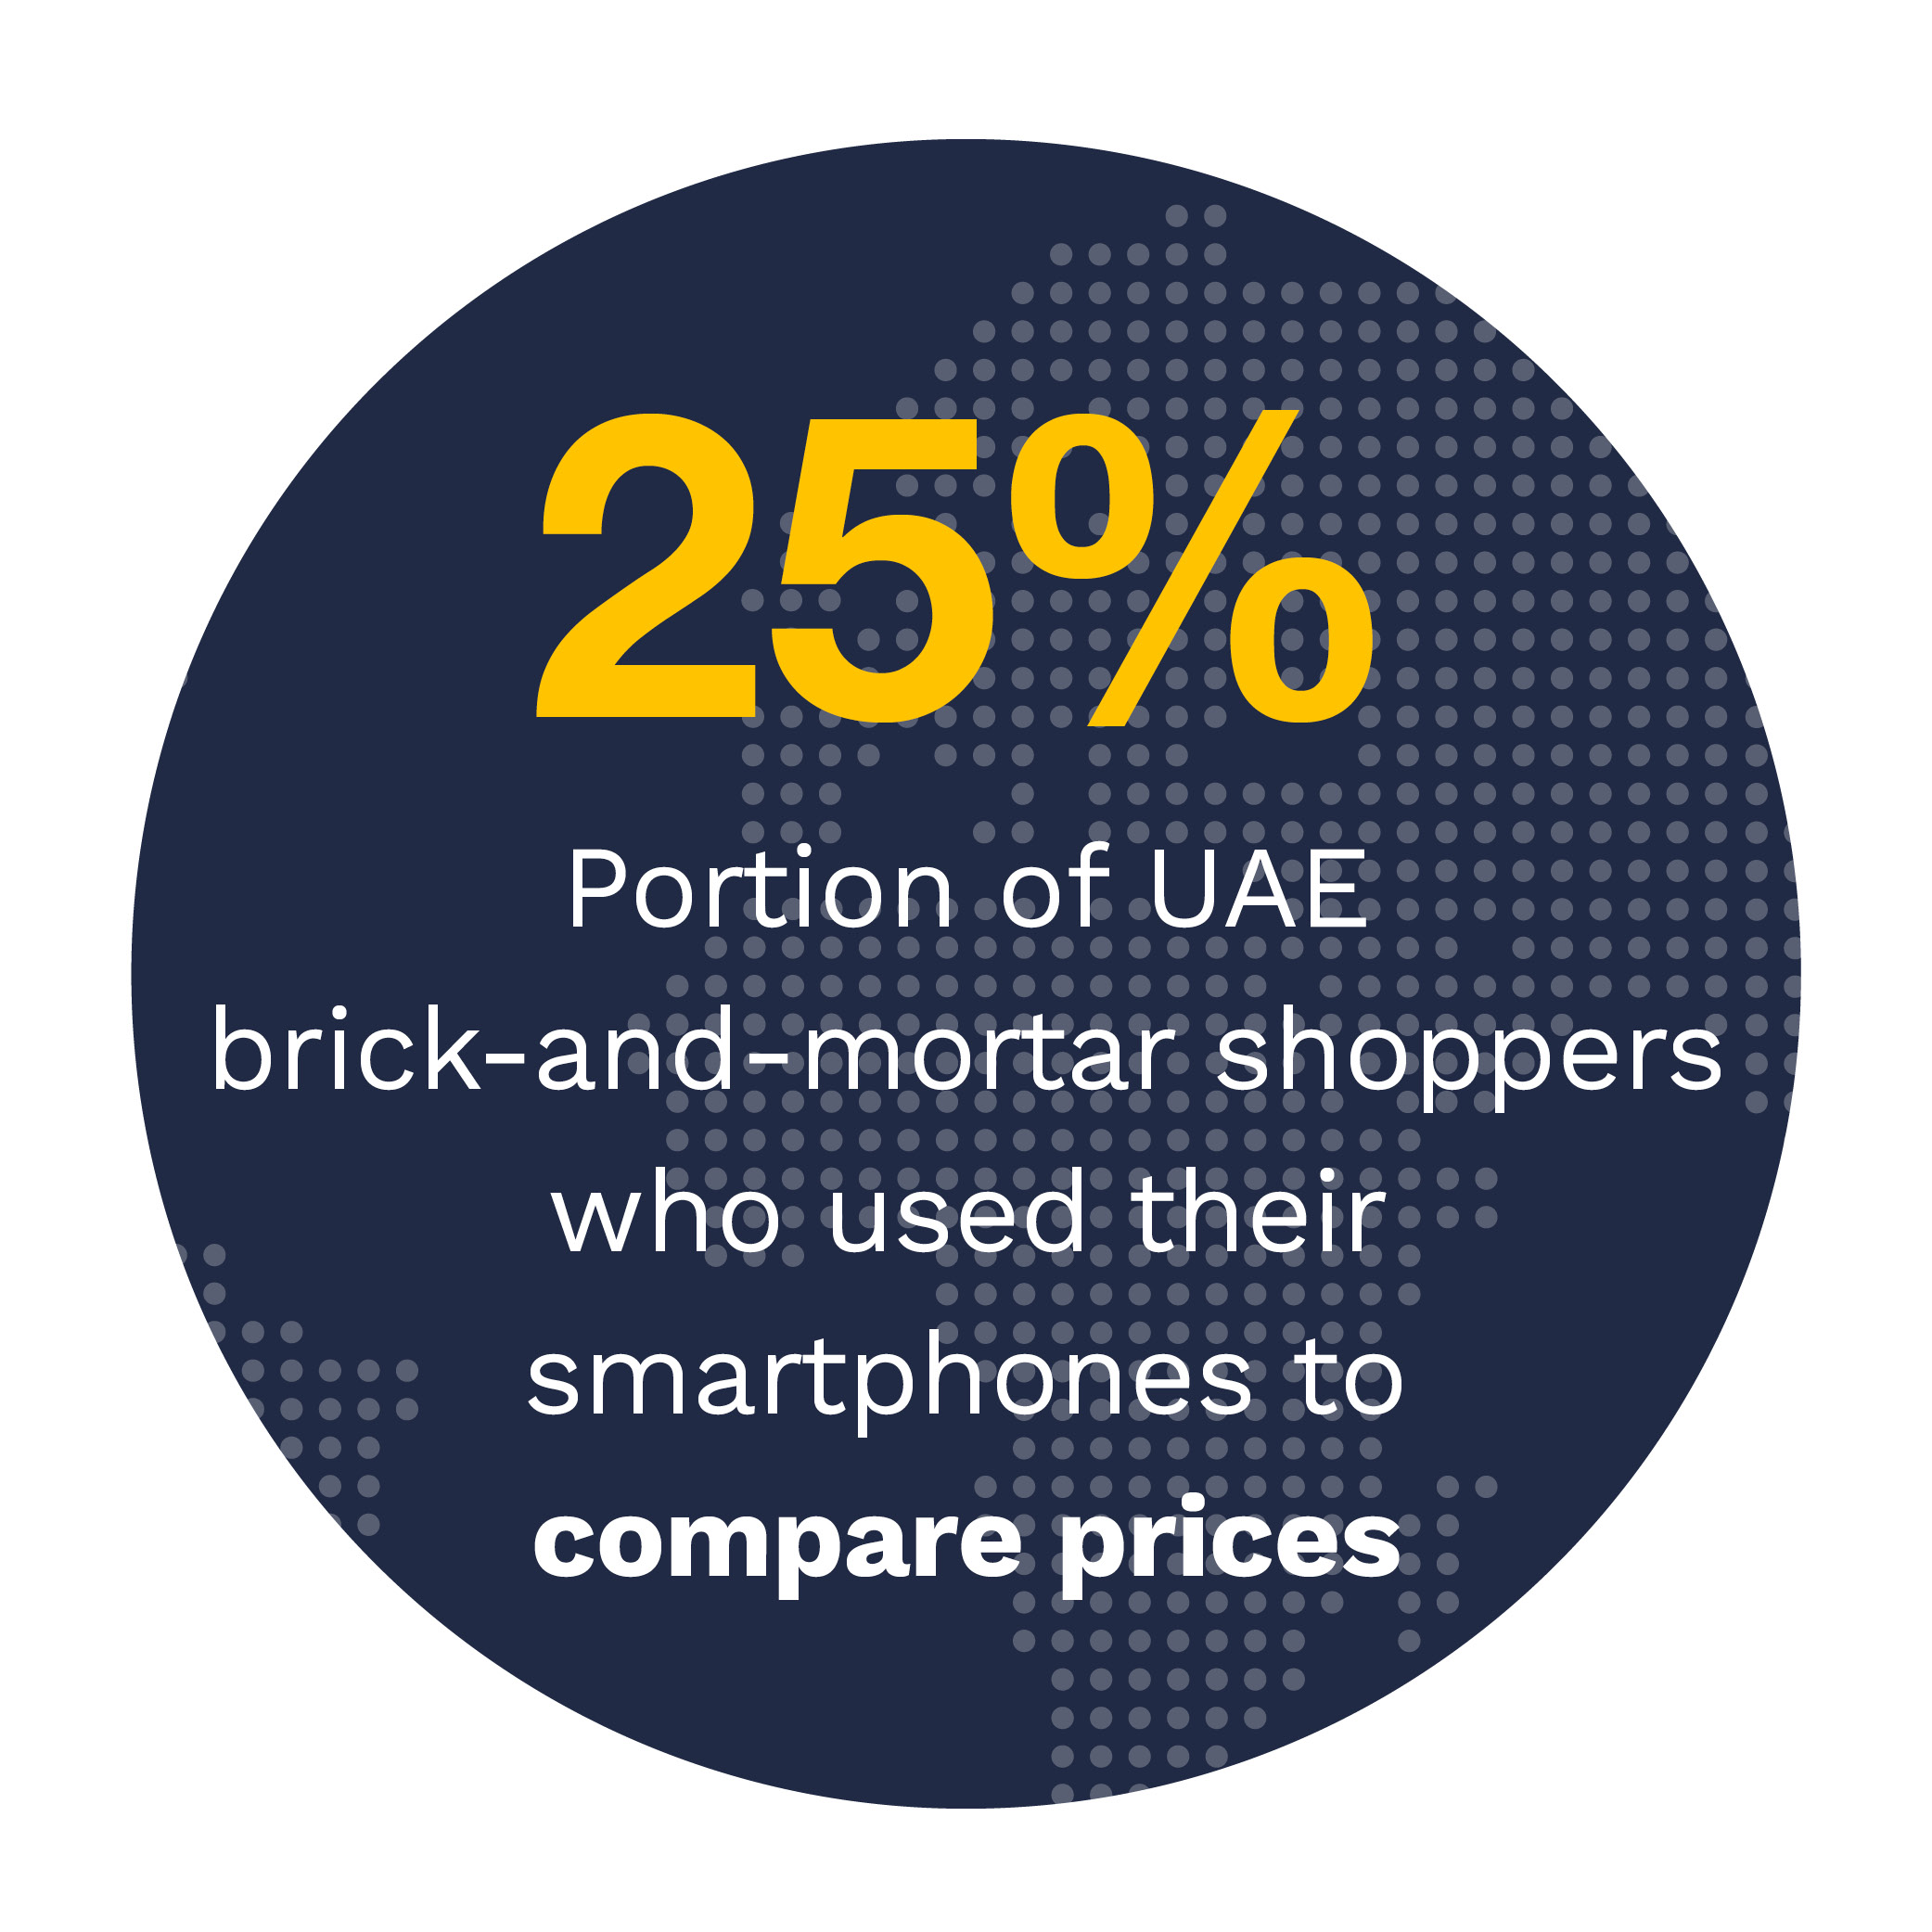 25%: Portion of UAE brick-and-mortar shoppers who used their smartphones to compare prices